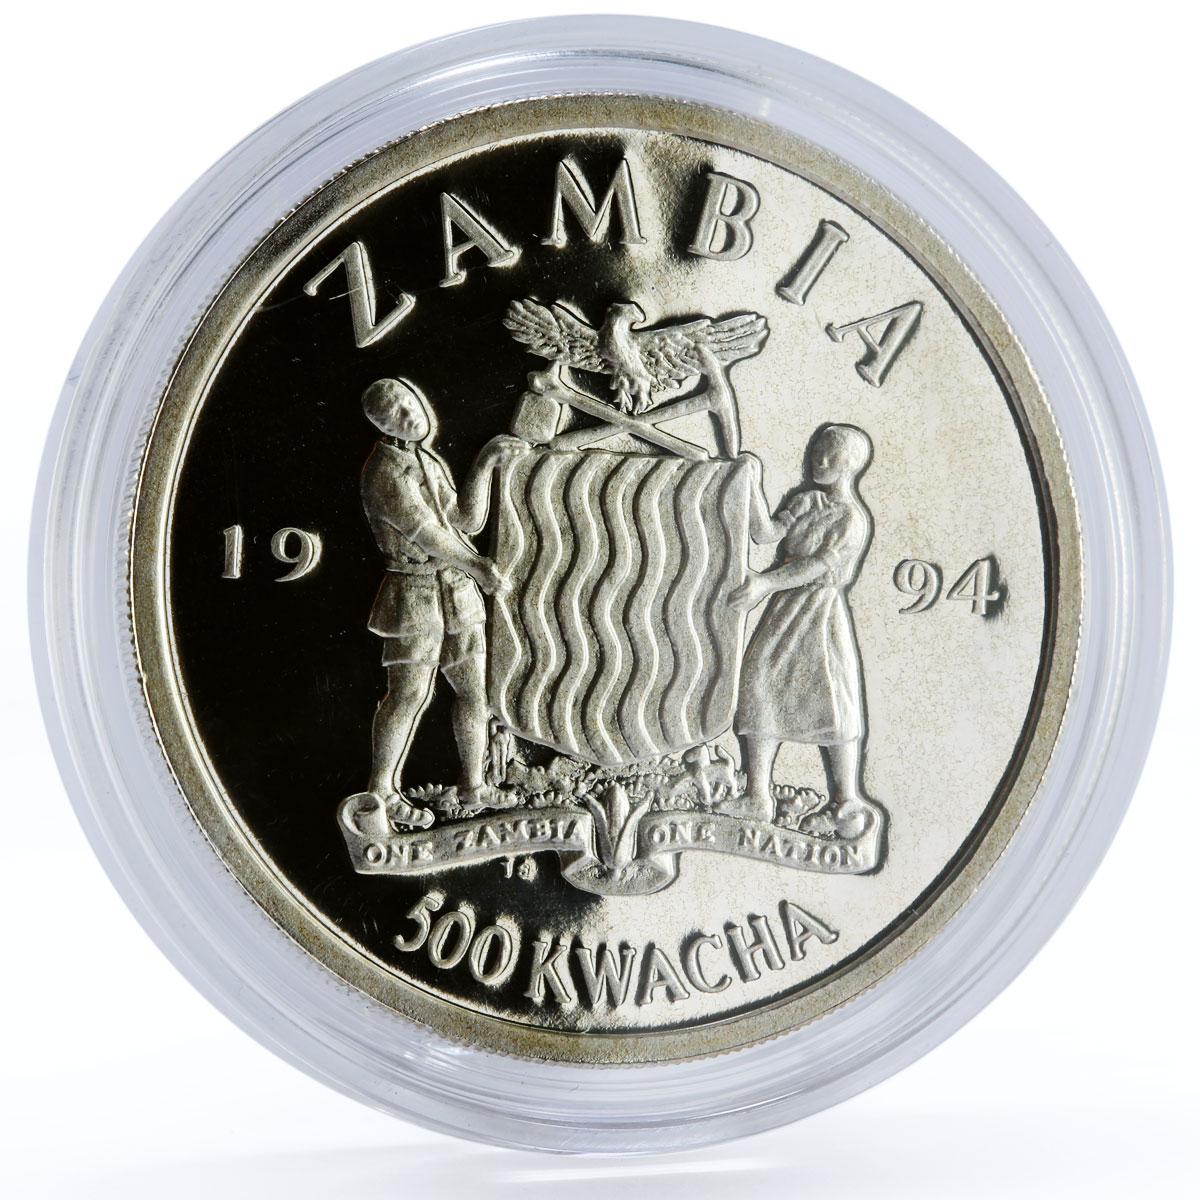 Zambia 500 kwacha Rights of Religion and Culture proof silver coin 1994